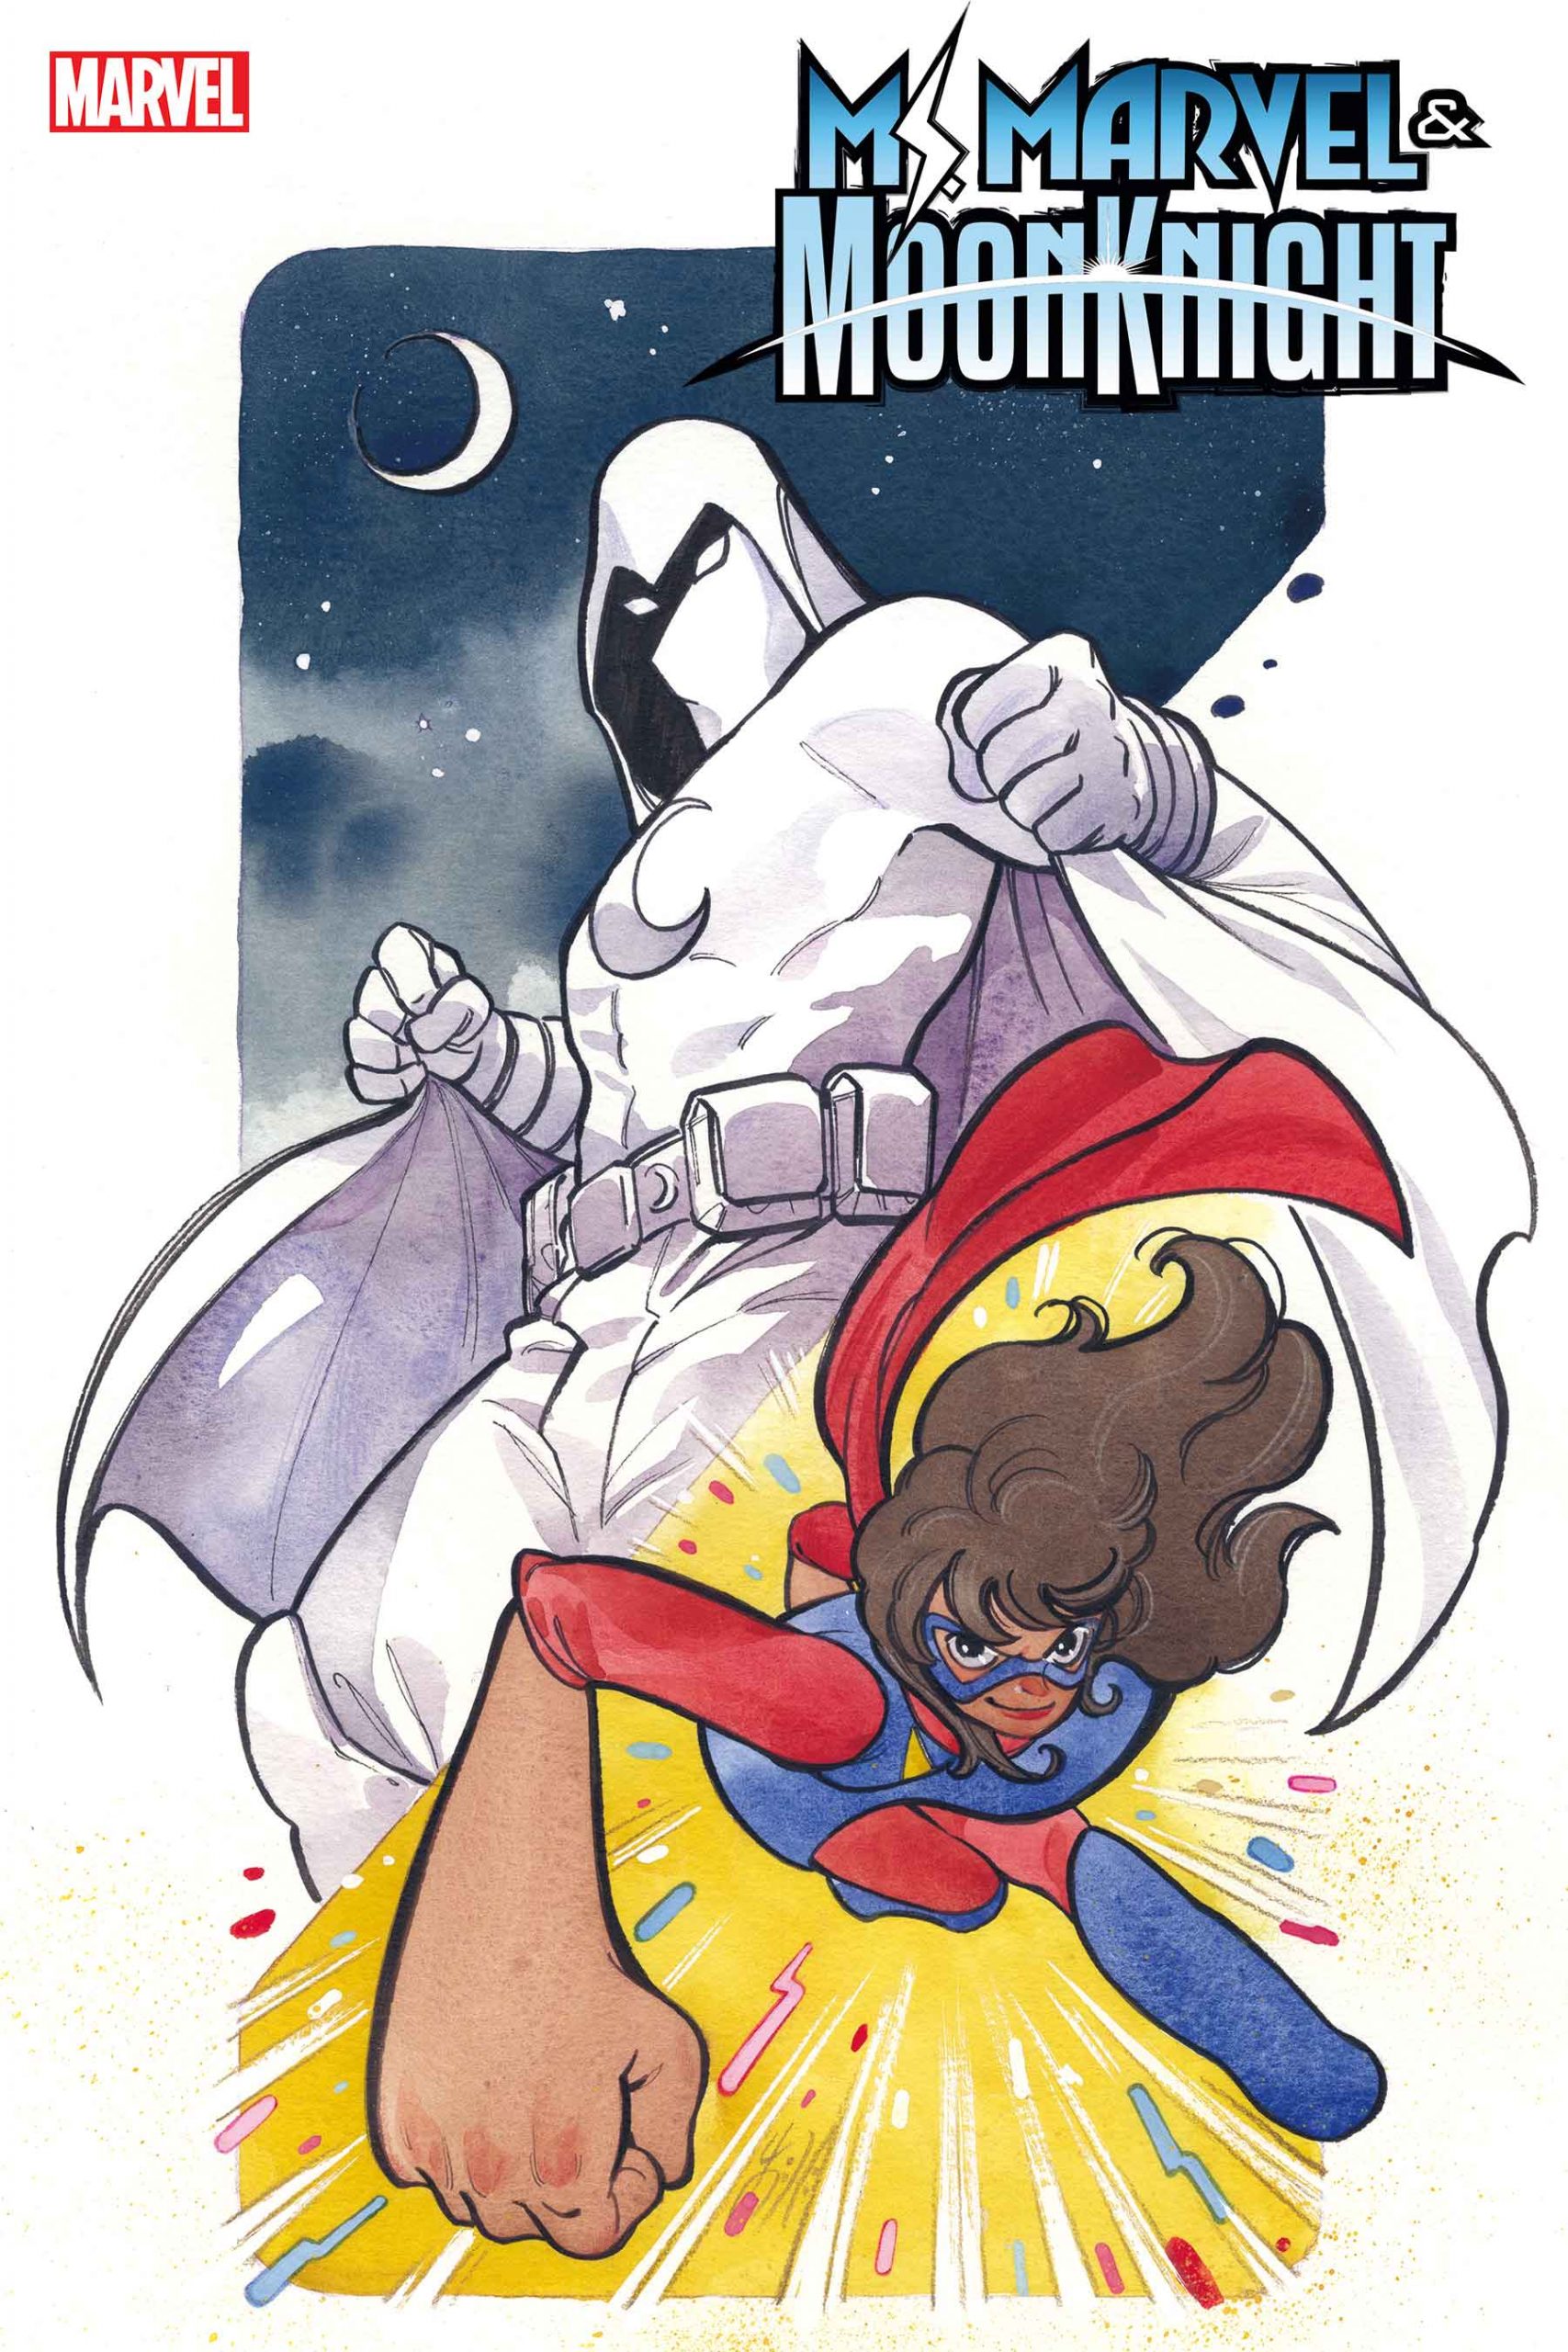 Ms. Marvel teaming up with Venom, Wolverine, and Moon Knight this August